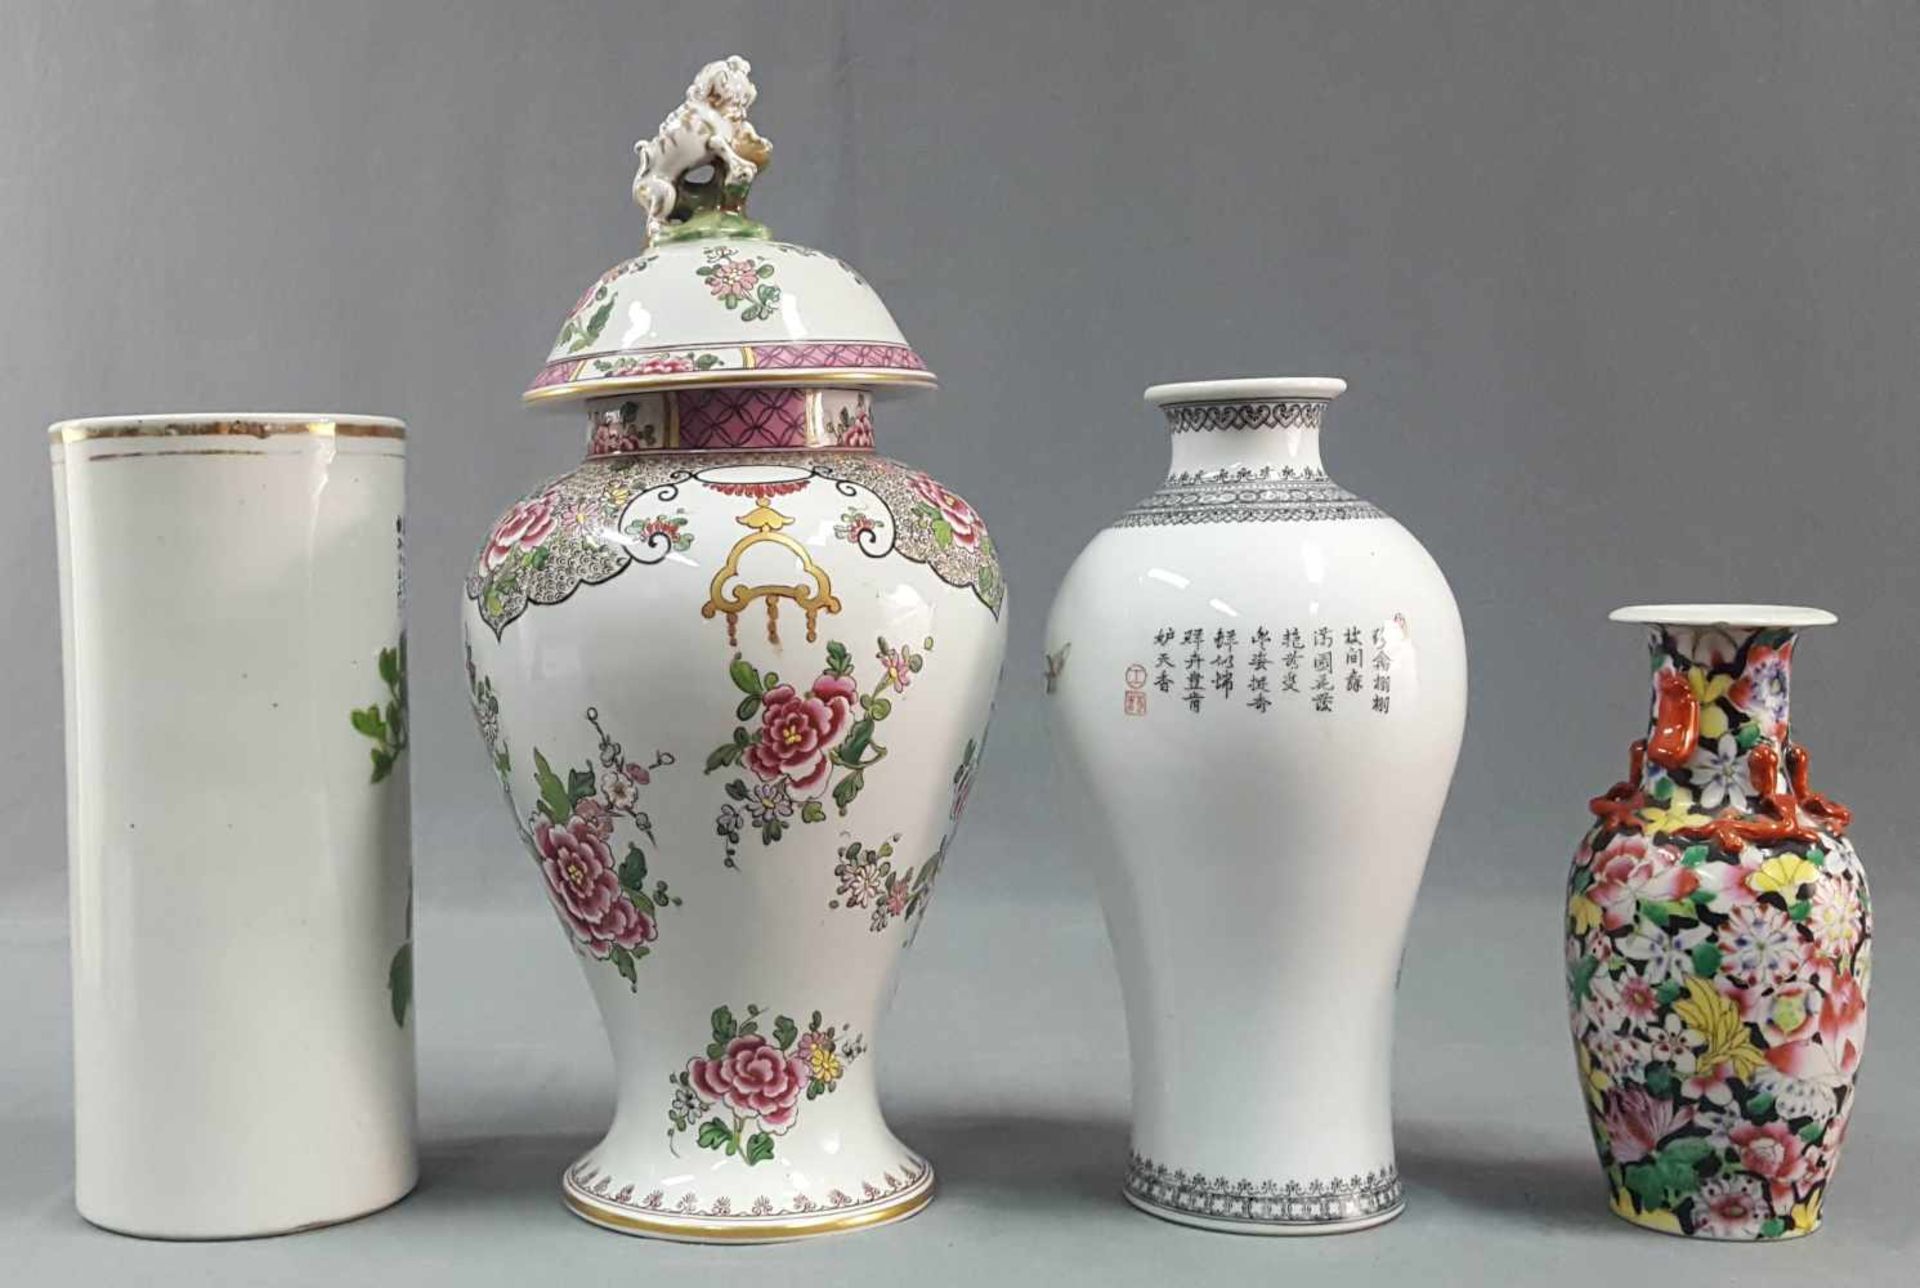 3 vases and 1 lid vase. Proably China. - Image 8 of 14